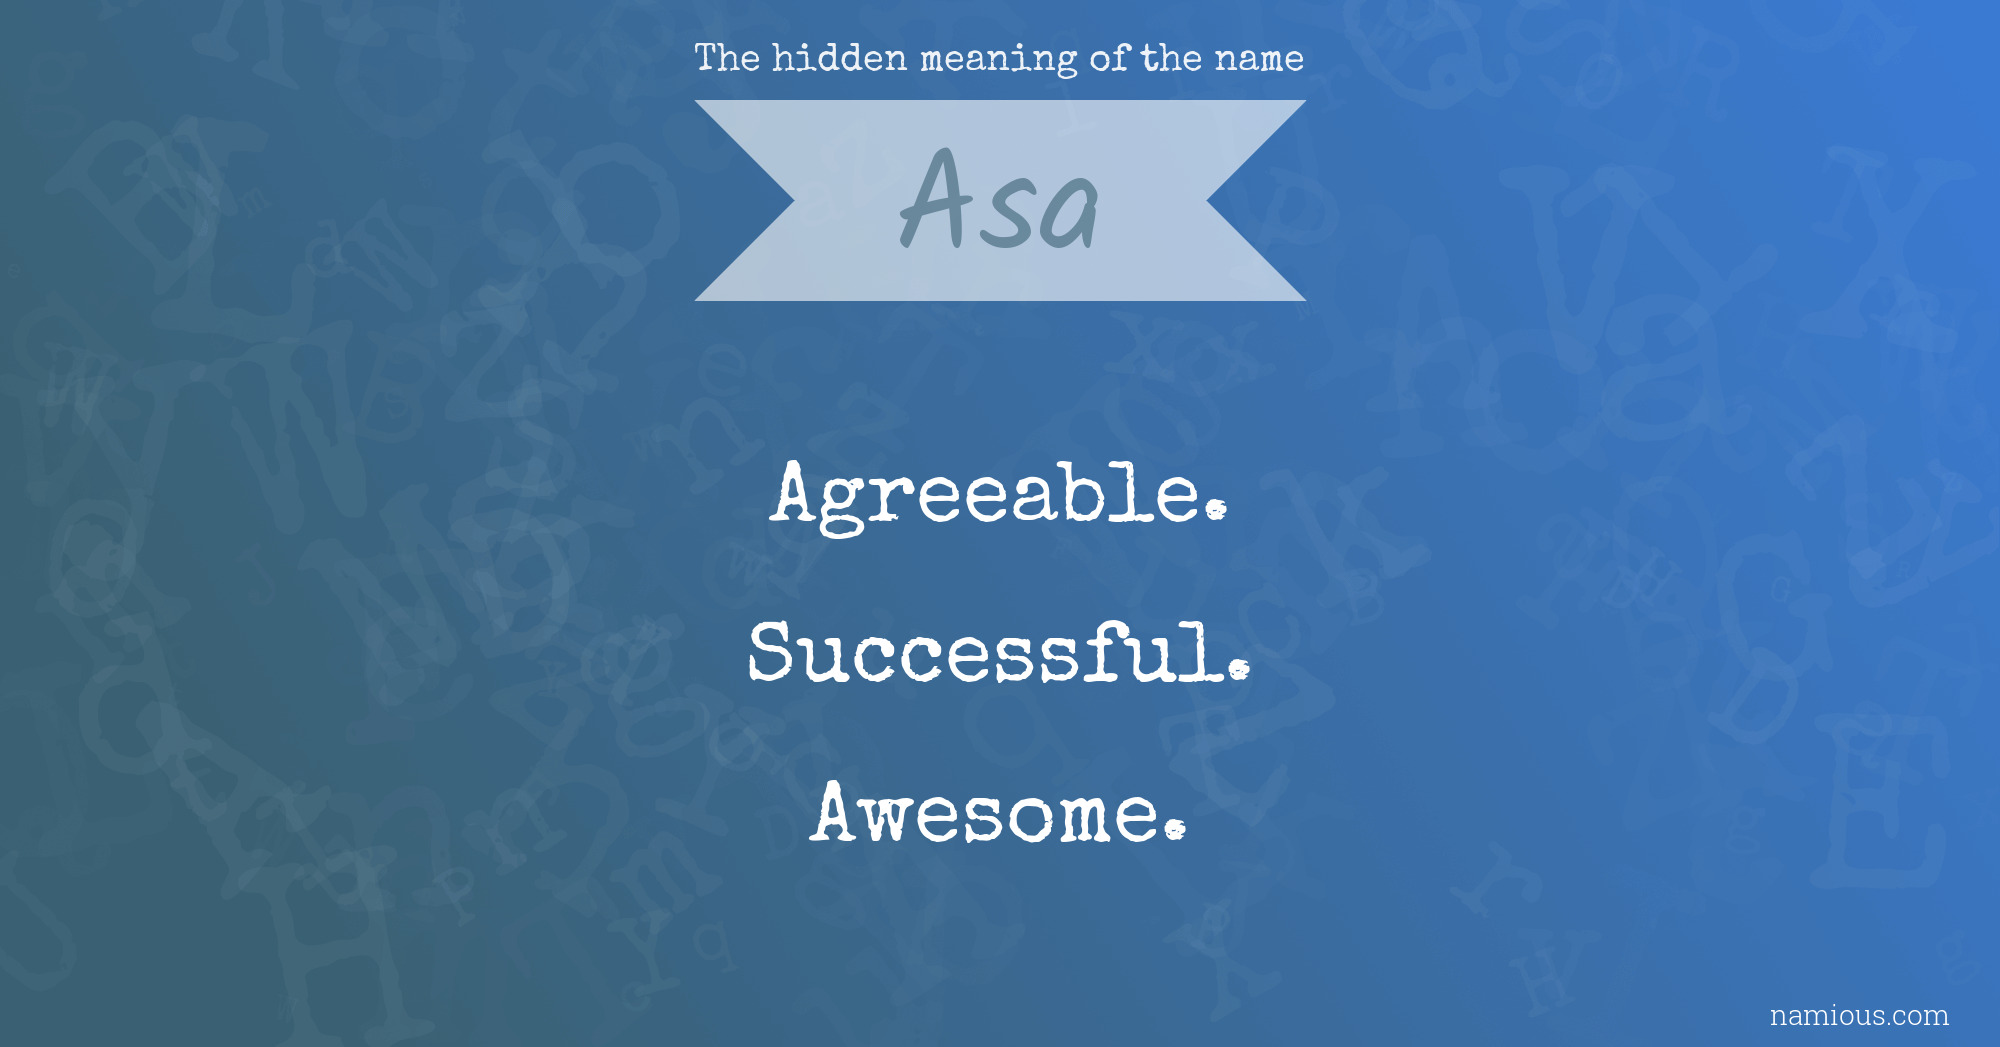 The hidden meaning of the name Asa